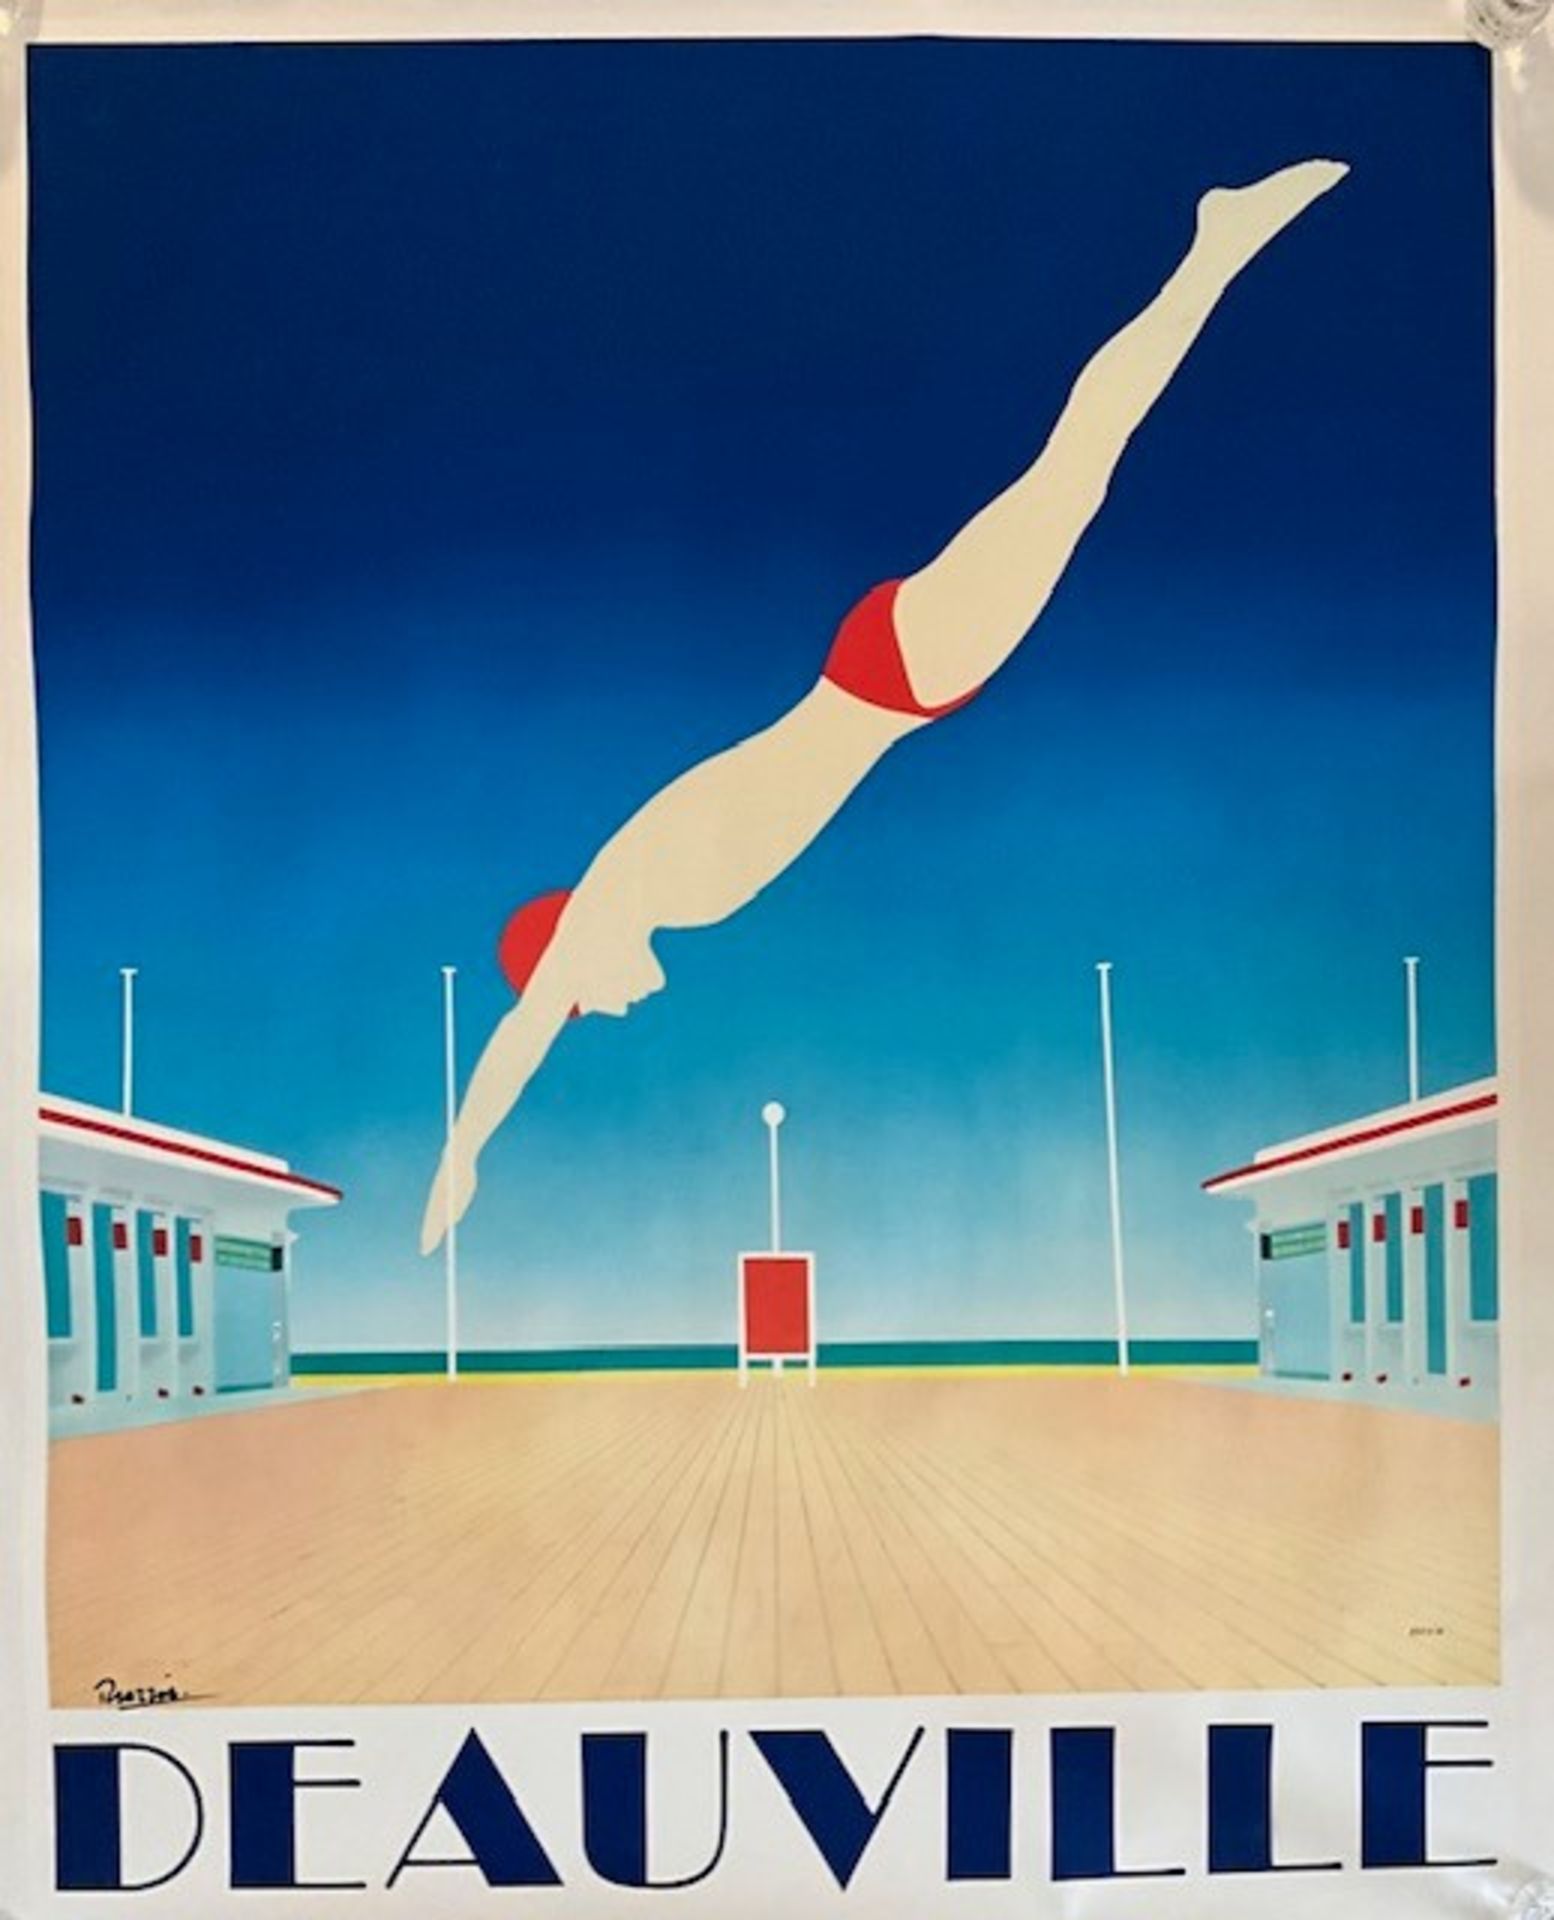 Deauville French Tourism Poster by Razzia, Signed & On Linen 1982 - Image 2 of 6